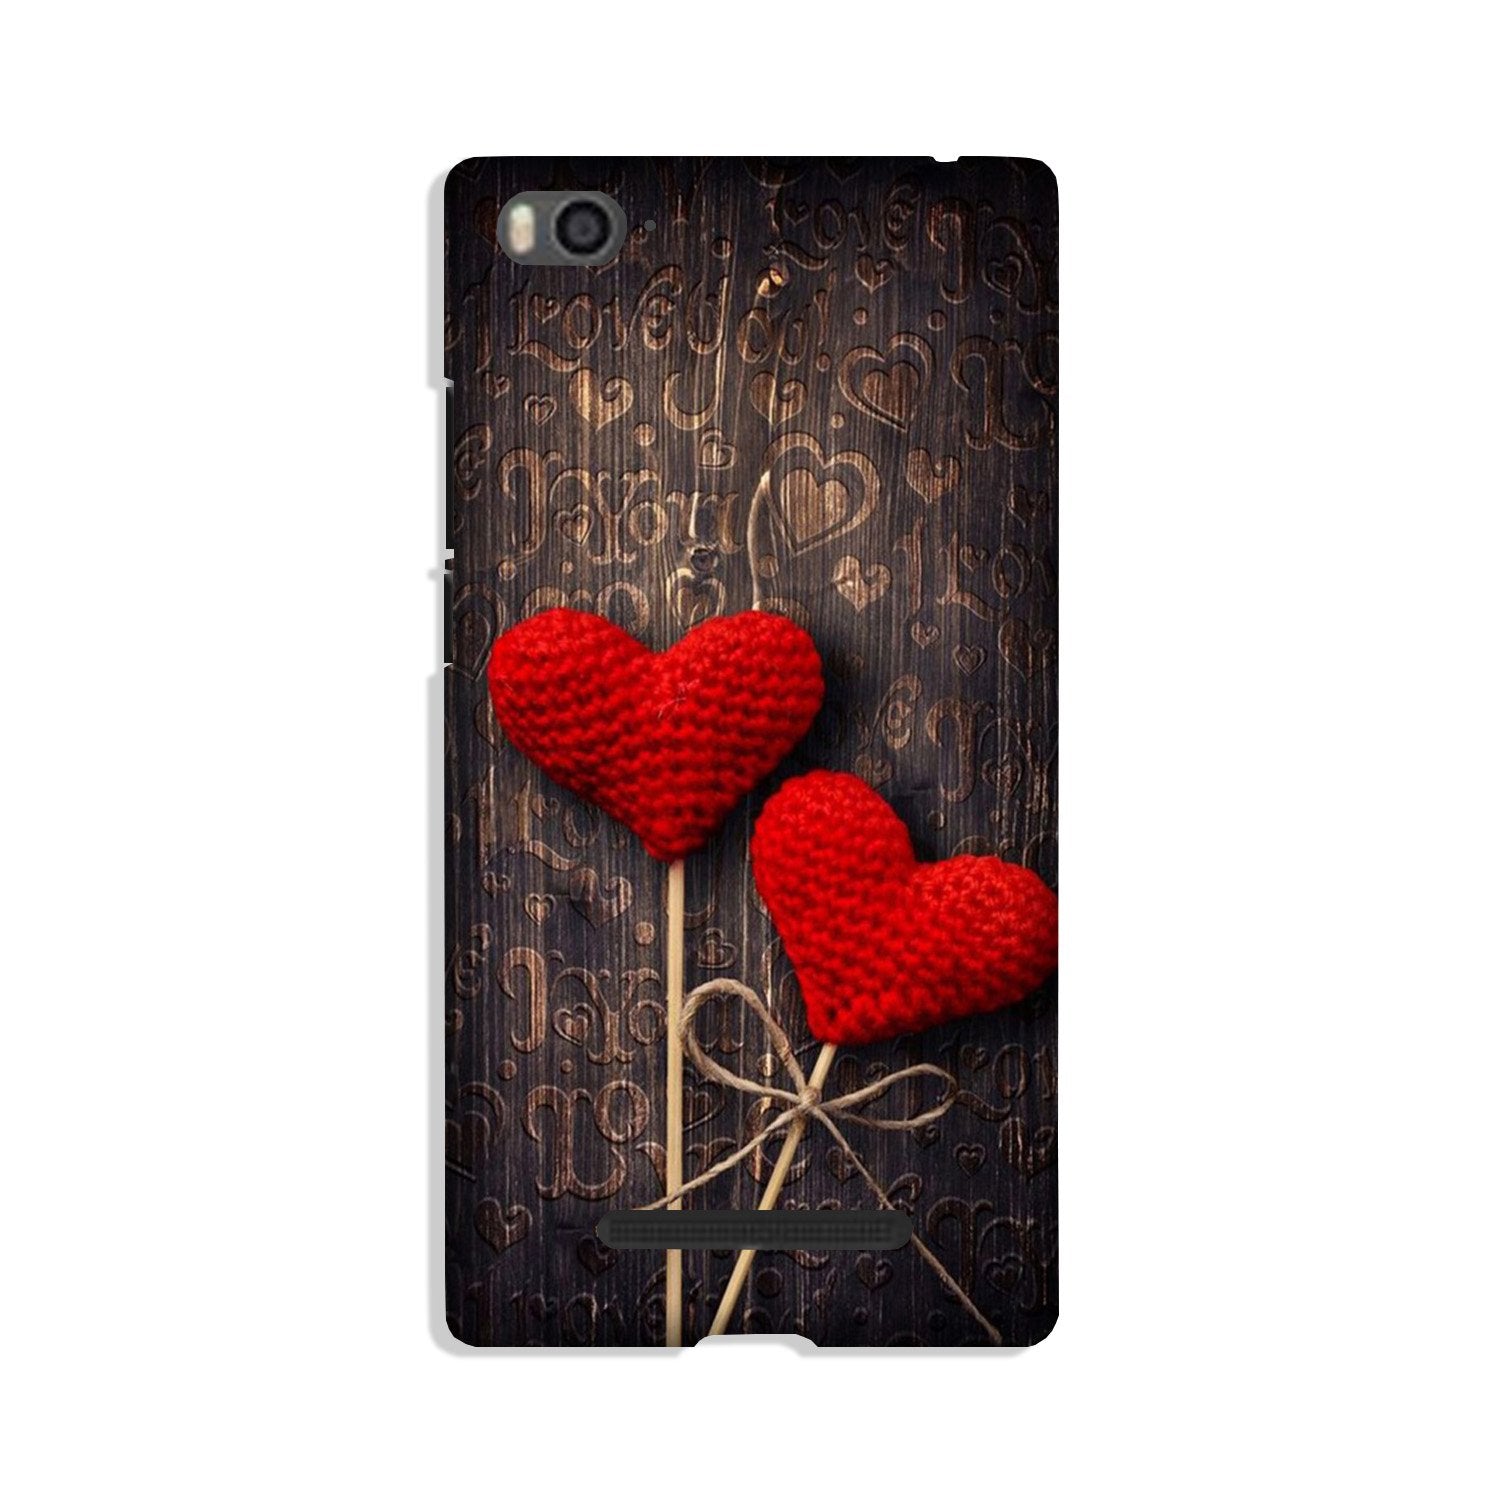 Red Hearts Case for Redmi 4A